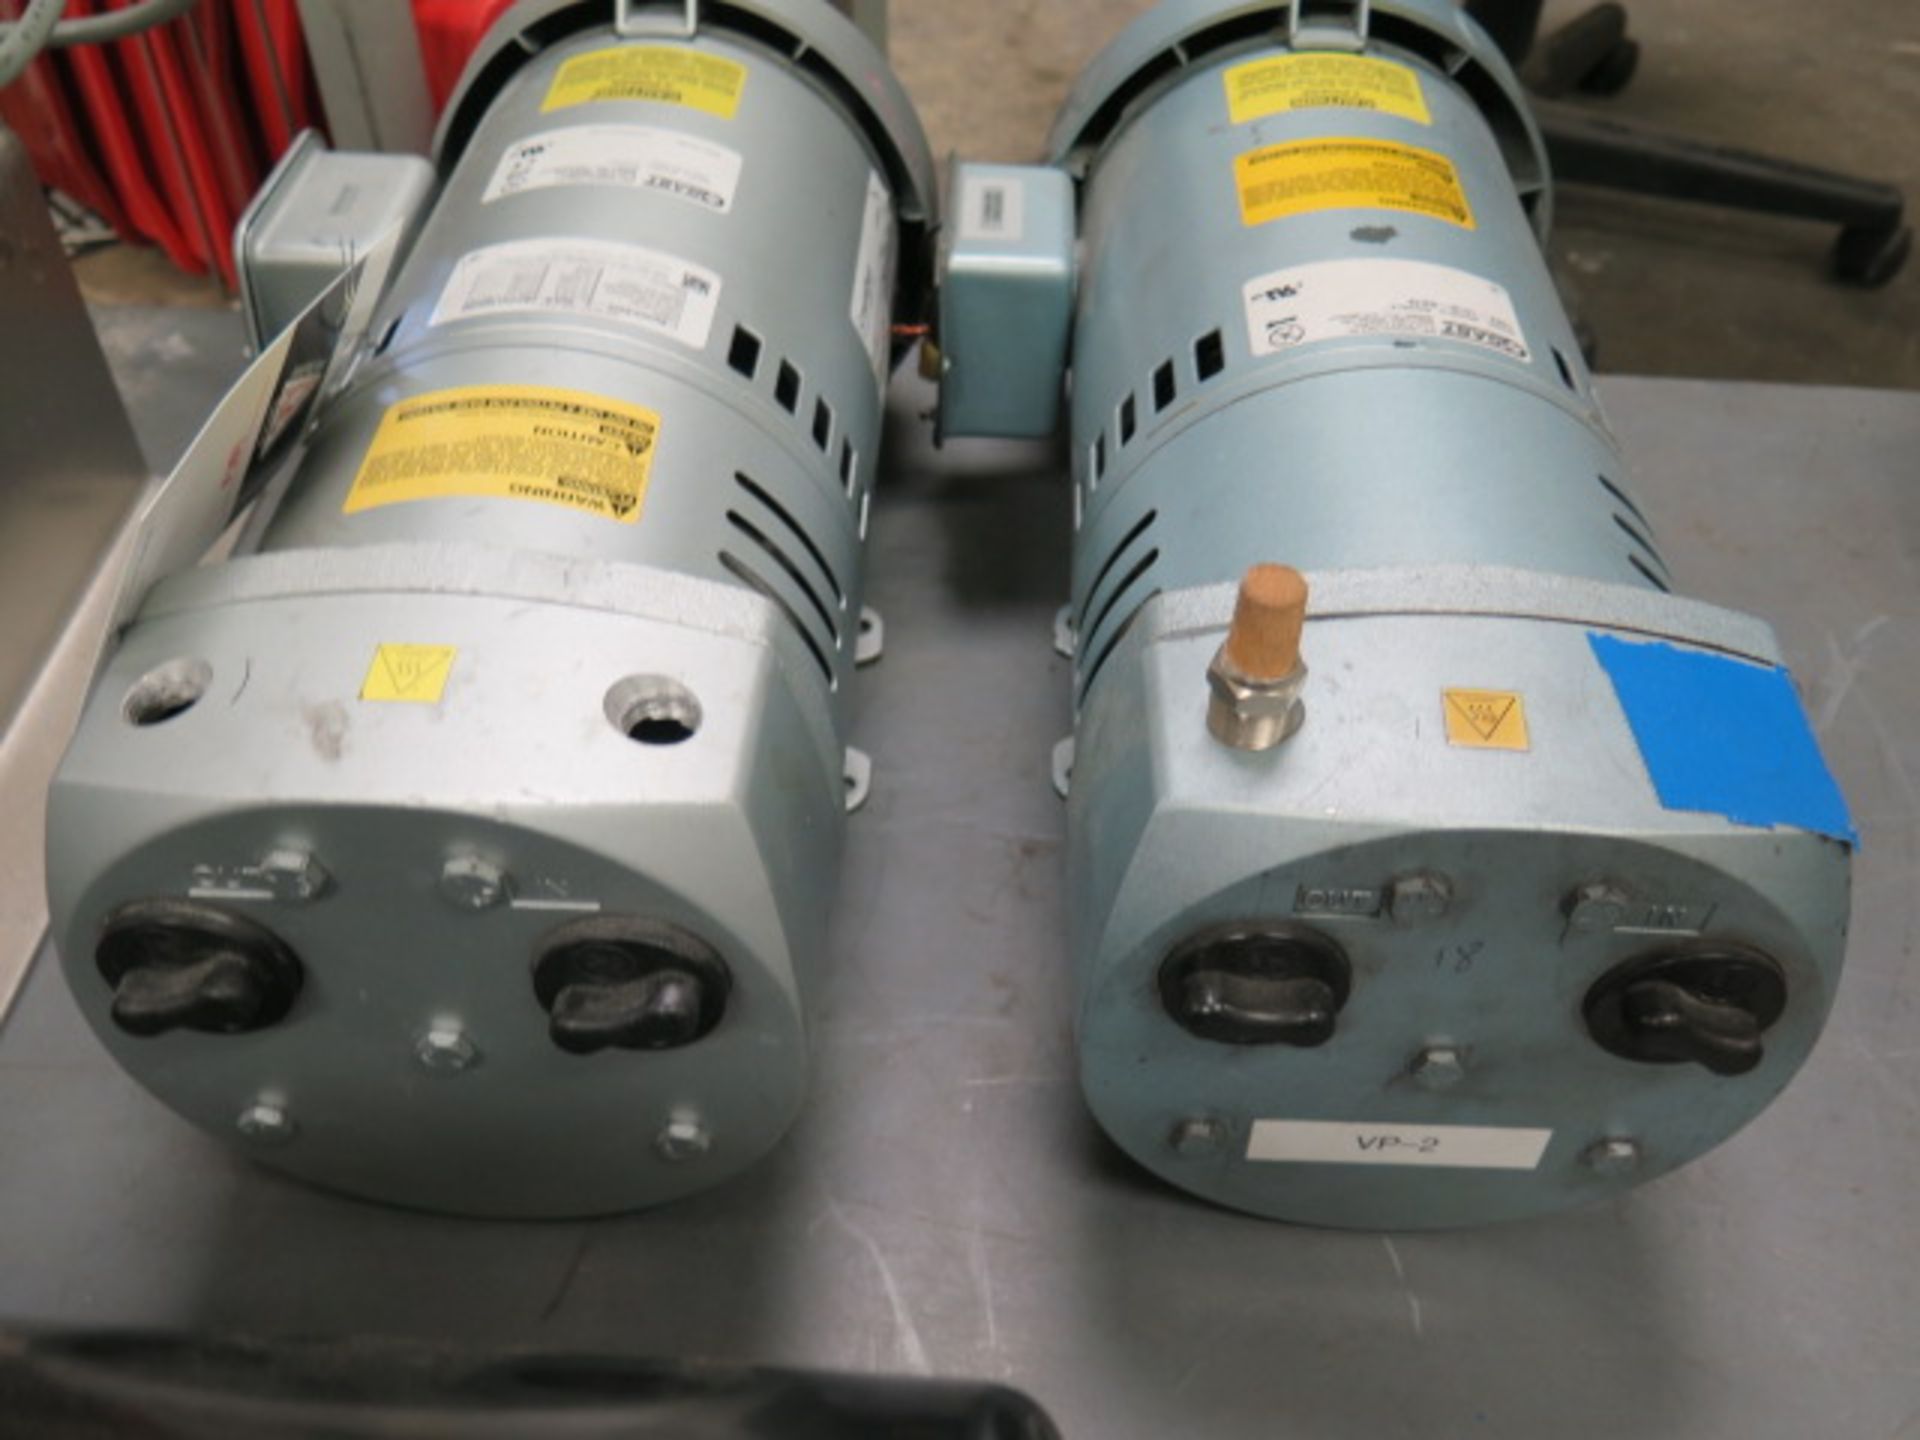 Gast mdl. 1023-101Q-G279 Vacuum Pumps (2) 3/4Hp 208-230/380-460V (SOLD AS-IS - NO WARRANTY) - Image 3 of 5